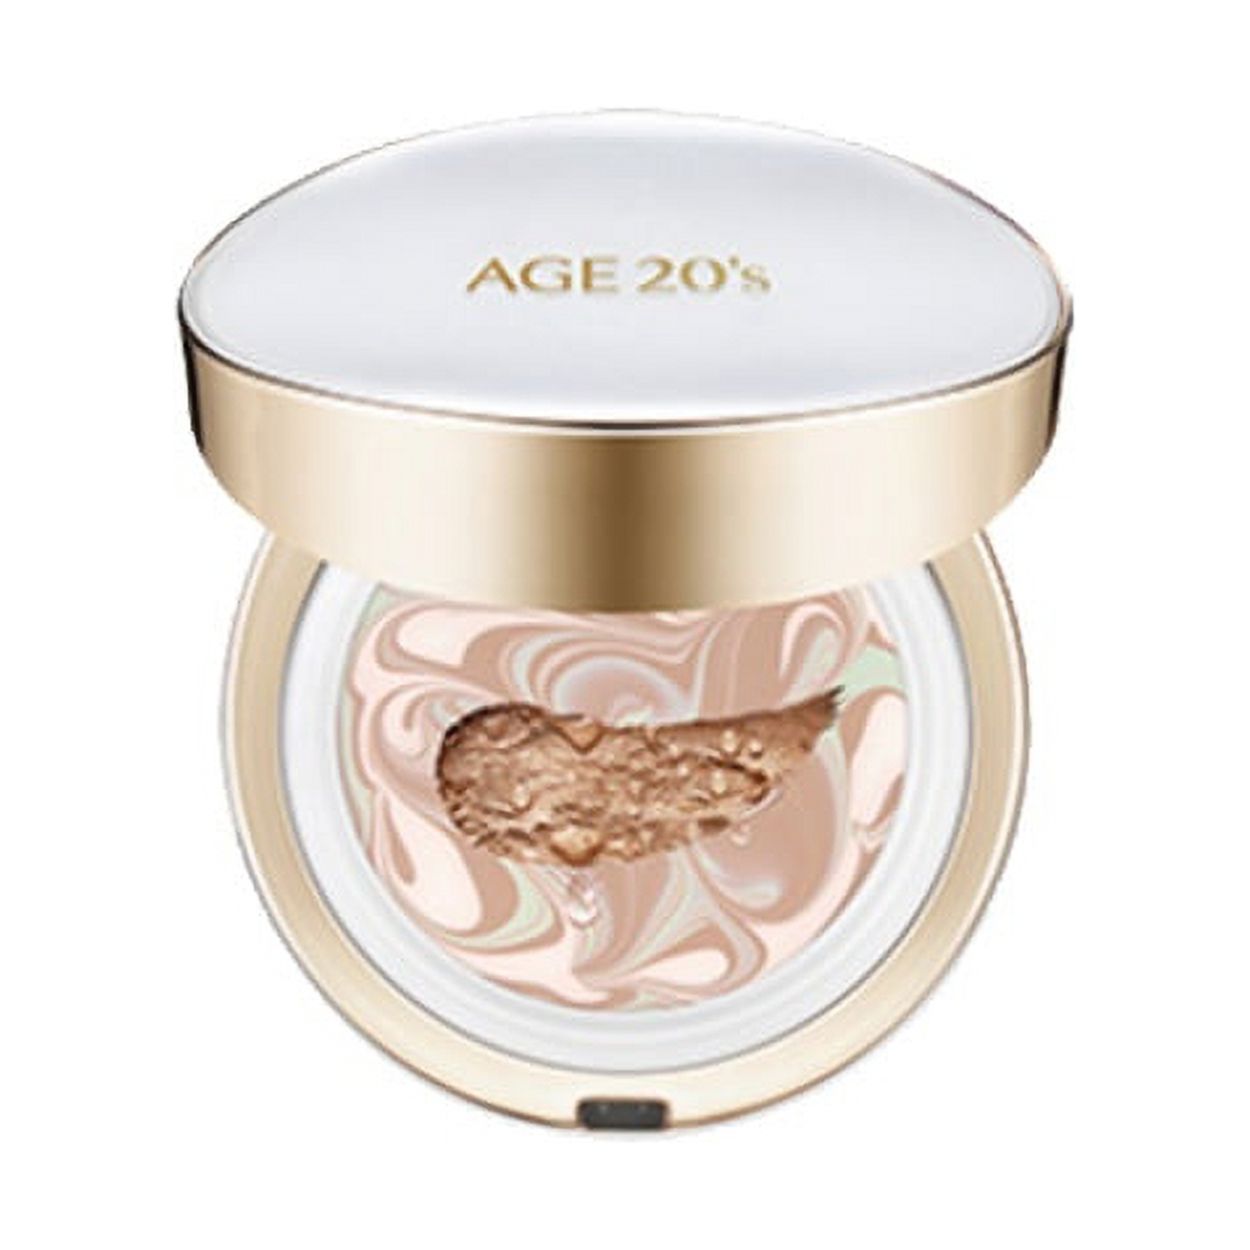 AGE 20'S Signature Essence Cover Pact SPF50+ / PA++++ Long Stay No.21 Light Beige - image 1 of 2